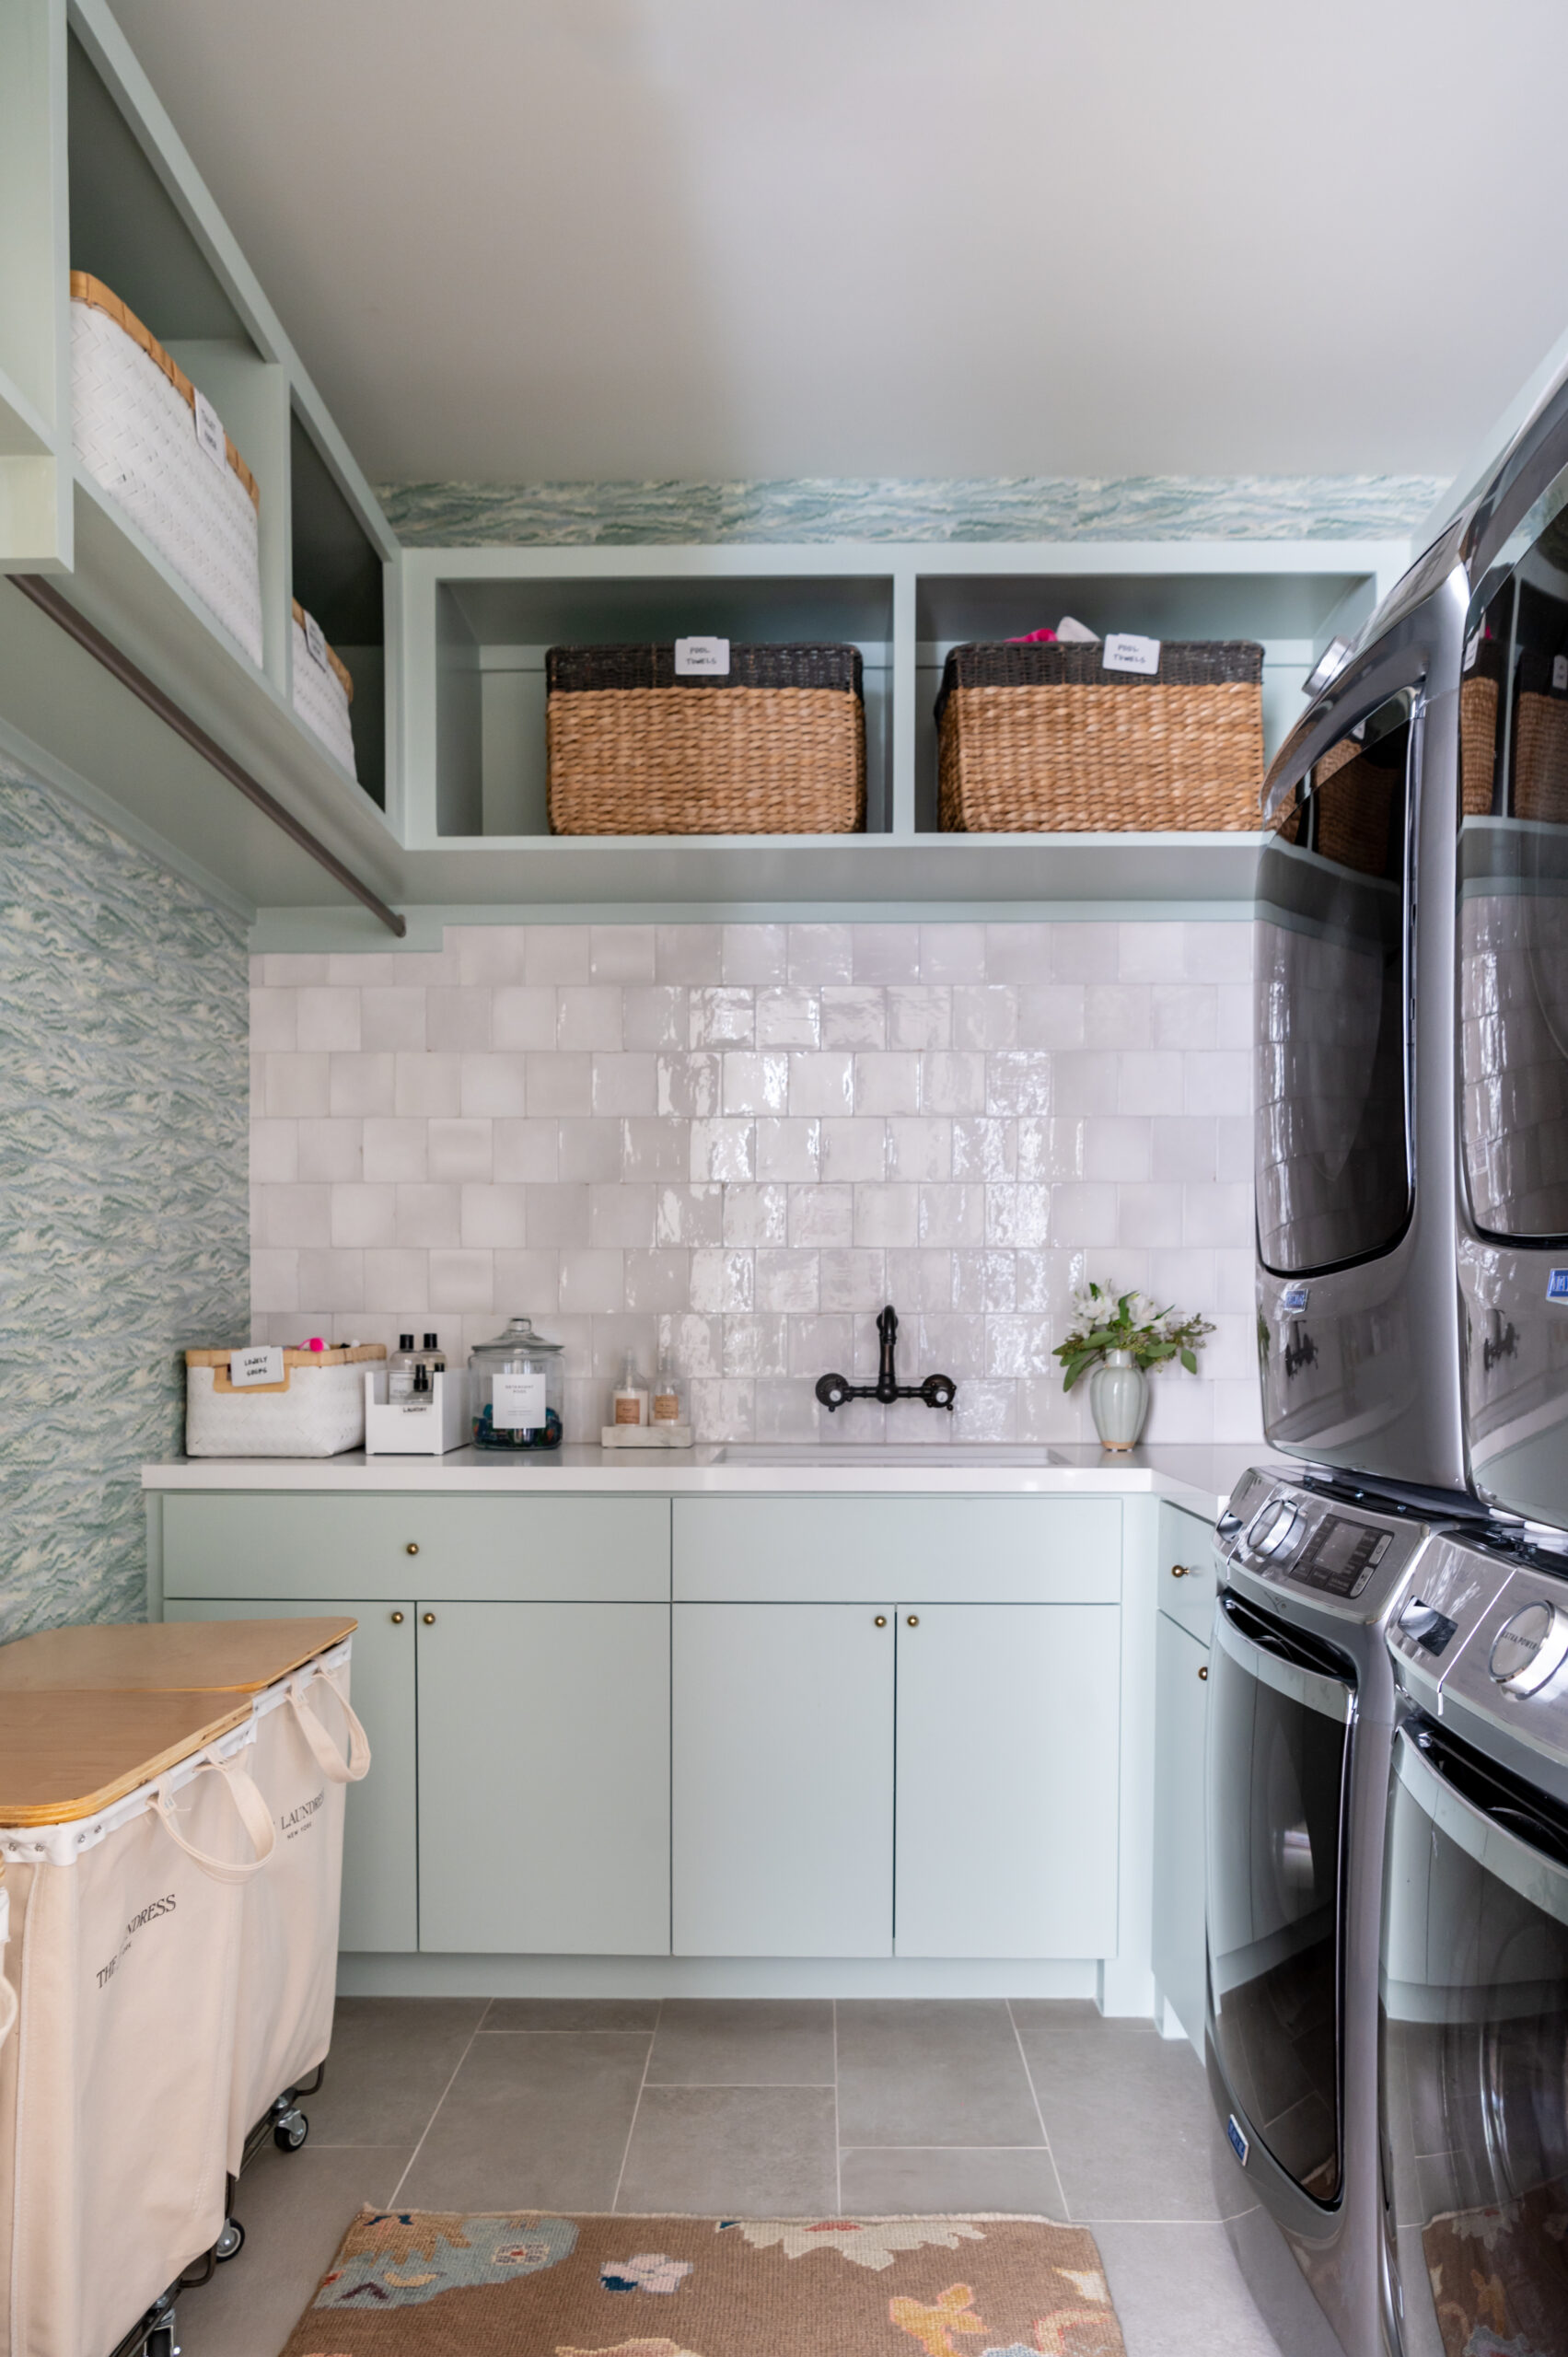 Laundry room interior design with bright colors